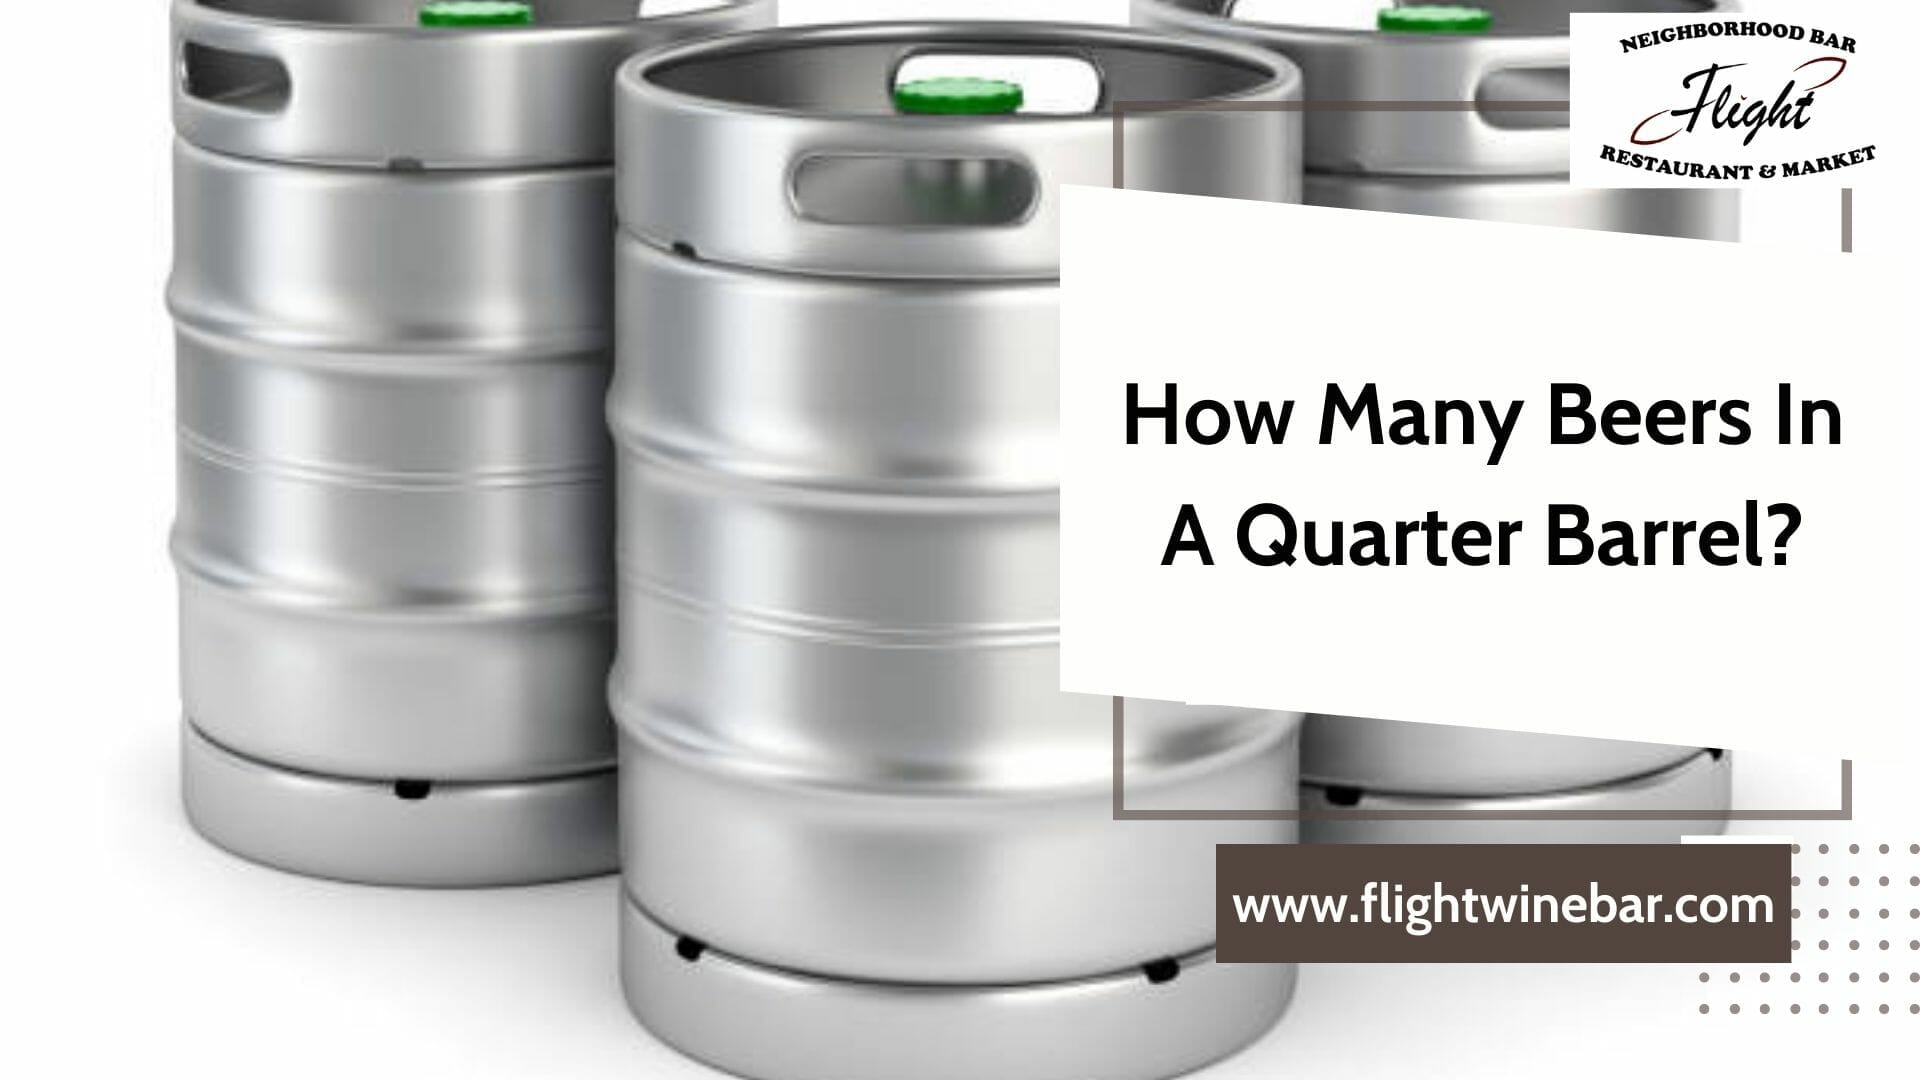 How Many Beers In A Quarter Barrel